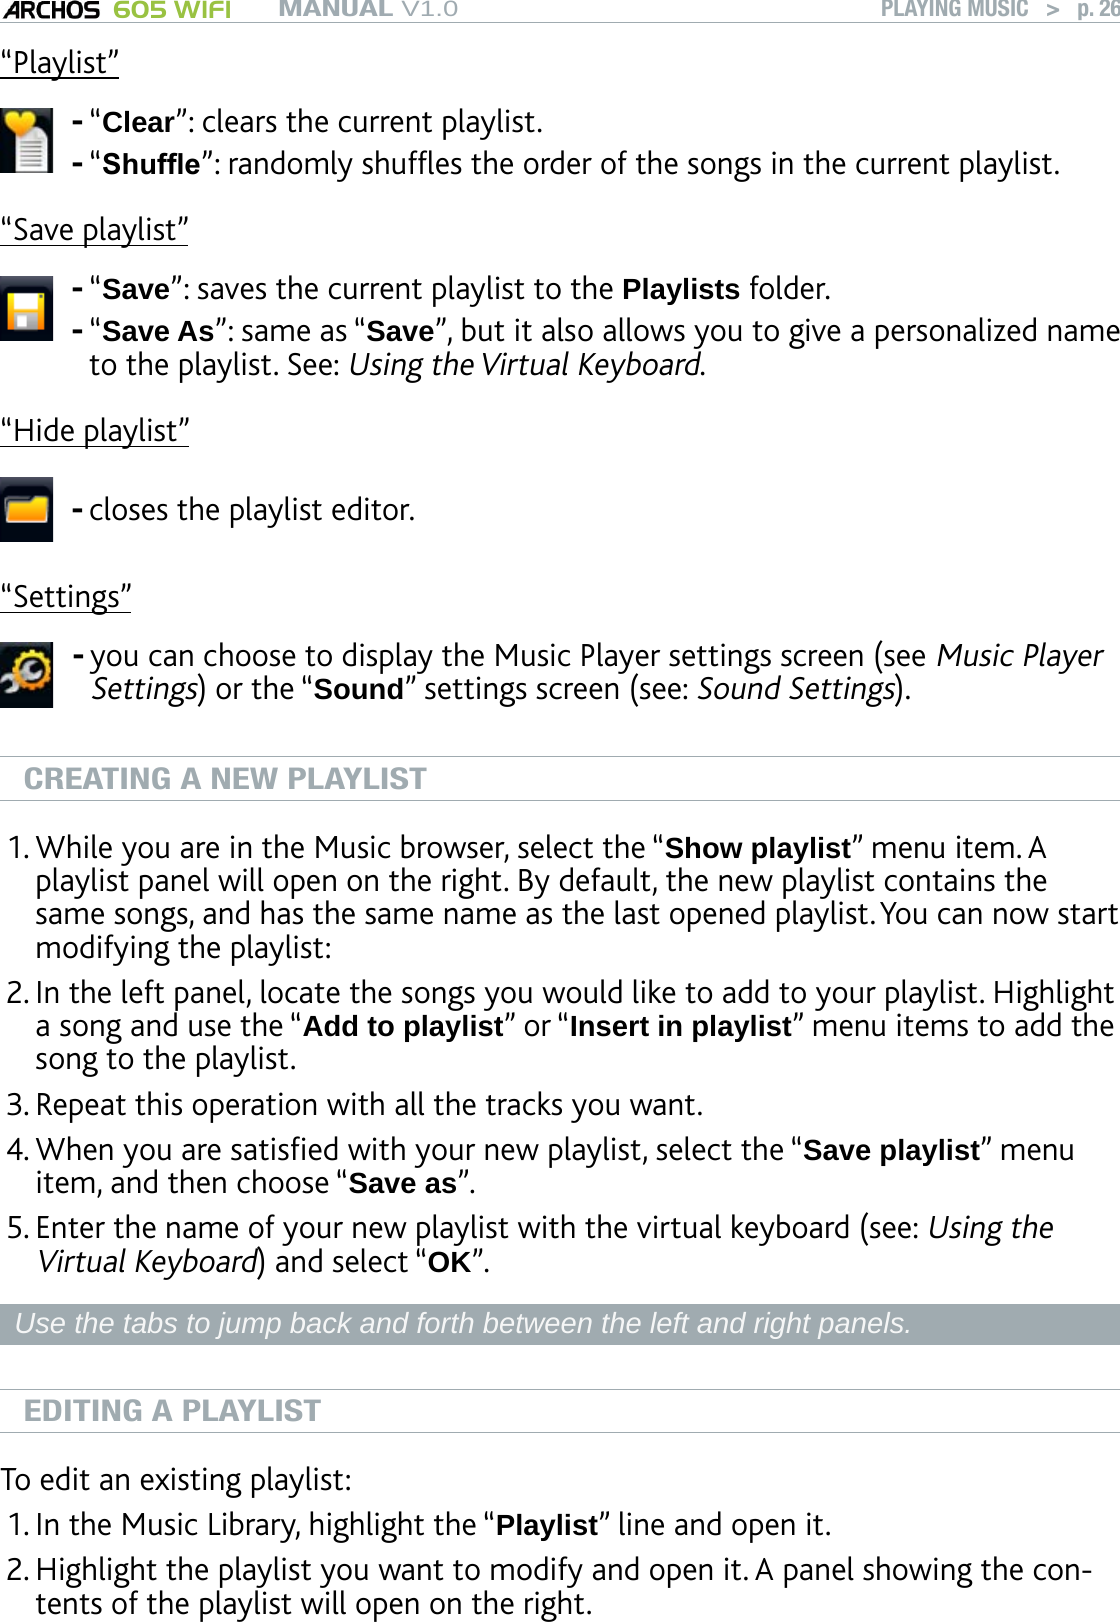 MANUAL V1.0 605 WIFI PLAYING MUSIC   &gt;   p. 26“Playlist”“Clear”: clears the current playlist.“Shufe”: randomly shufes the order of the songs in the current playlist.--“Save playlist”“Save”: saves the current playlist to the Playlists folder.“Save As”: same as “Save”, but it also allows you to give a personalized name to the playlist. See: Using the Virtual Keyboard.--“Hide playlist”closes the playlist editor.-“Settings”you can choose to display the Music Player settings screen (see Music Player Settings) or the “Sound” settings screen (see: Sound Settings).-CREATING A NEW PLAYLISTWhile you are in the Music browser, select the “Show playlist” menu item. A playlist panel will open on the right. By default, the new playlist contains the same songs, and has the same name as the last opened playlist. You can now start modifying the playlist:In the left panel, locate the songs you would like to add to your playlist. Highlight a song and use the “Add to playlist” or “Insert in playlist” menu items to add the song to the playlist.Repeat this operation with all the tracks you want. When you are satised with your new playlist, select the “Save playlist” menu item, and then choose “Save as”. Enter the name of your new playlist with the virtual keyboard (see: Using the Virtual Keyboard) and select “OK”.Use the tabs to jump back and forth between the left and right panels.EDITING A PLAYLISTTo edit an existing playlist: In the Music Library, highlight the “Playlist” line and open it.Highlight the playlist you want to modify and open it. A panel showing the con-tents of the playlist will open on the right.1.2.3.4.5.1.2.